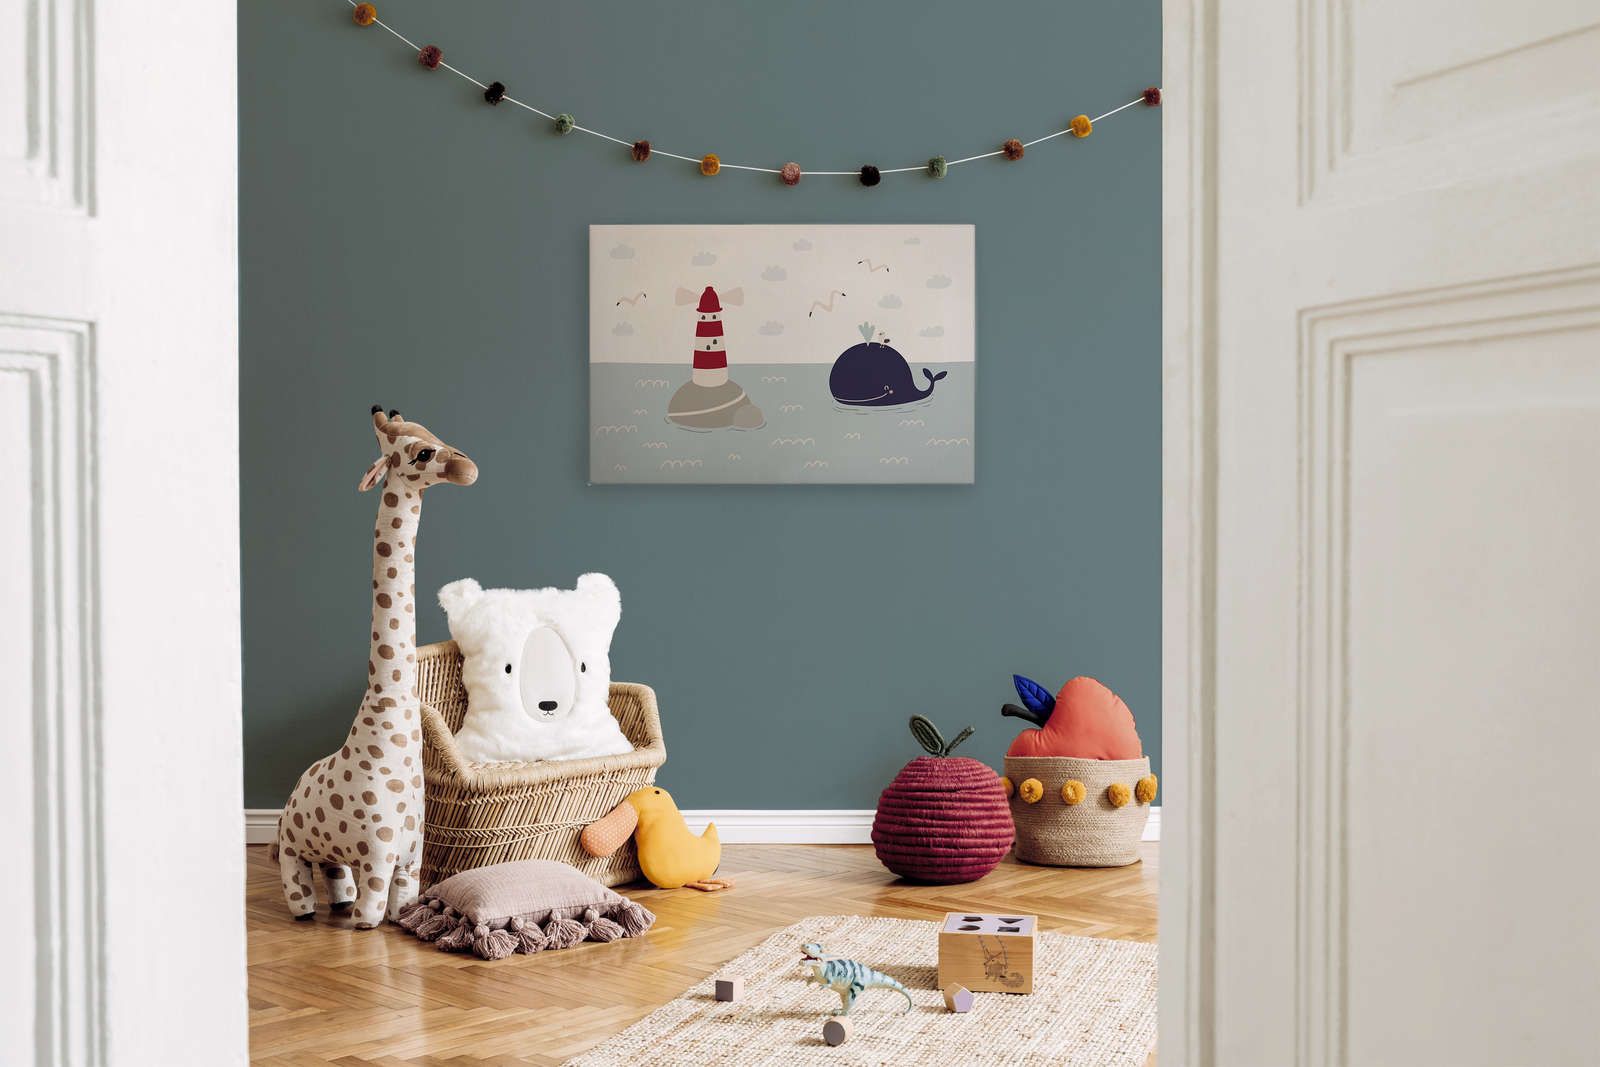             Canvas for children's room with lighthouse and whale - 90 cm x 60 cm
        